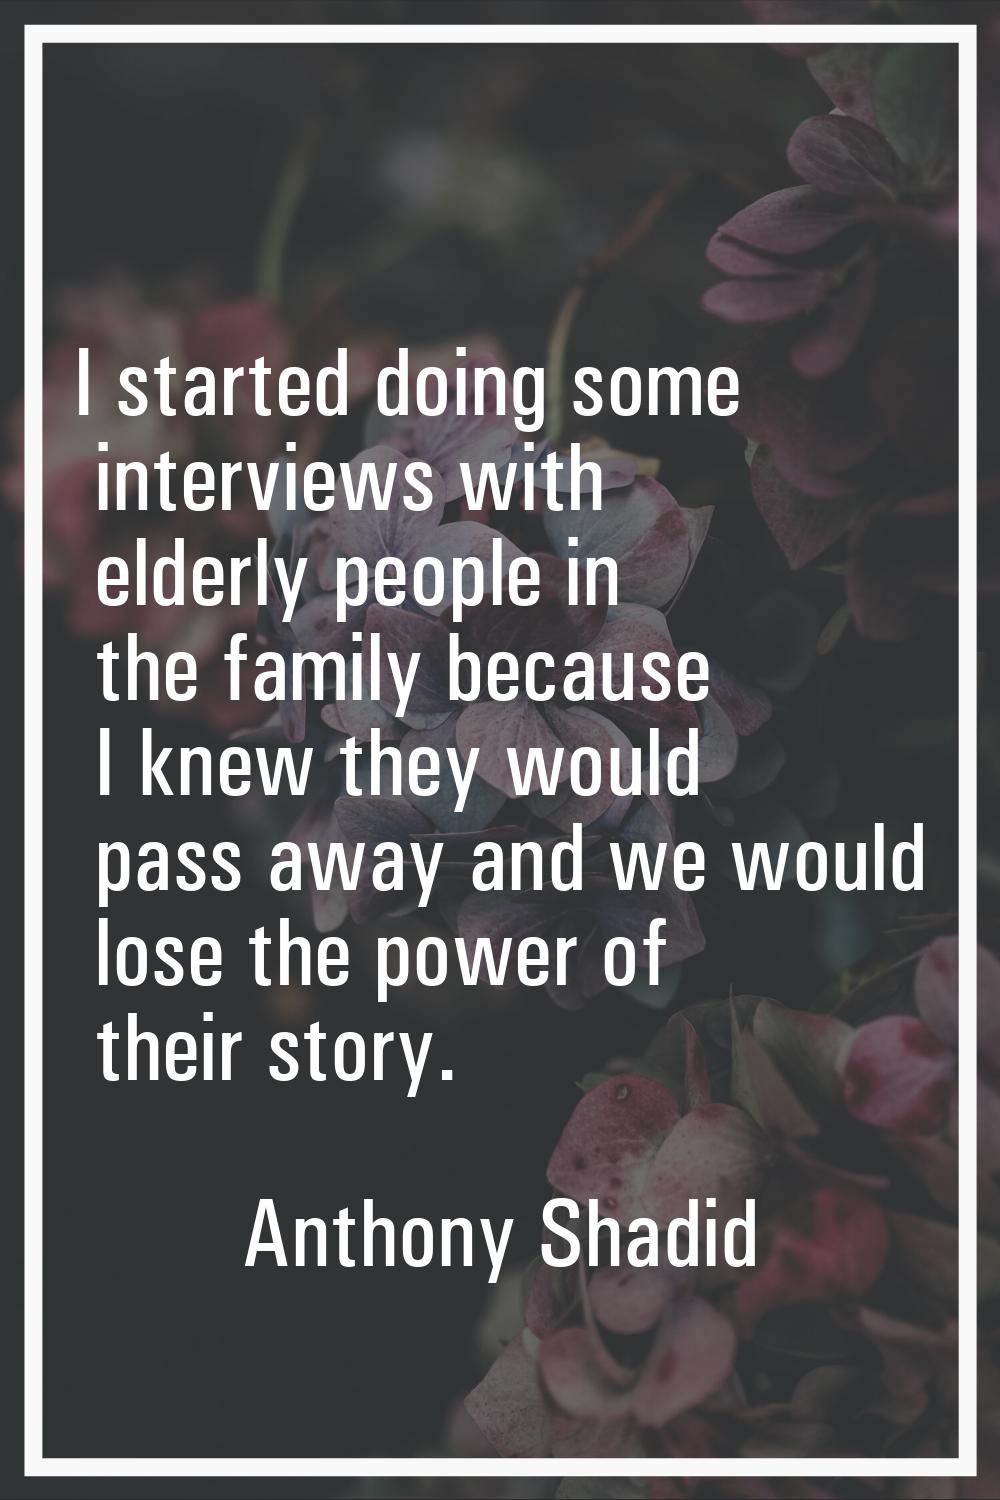 I started doing some interviews with elderly people in the family because I knew they would pass aw